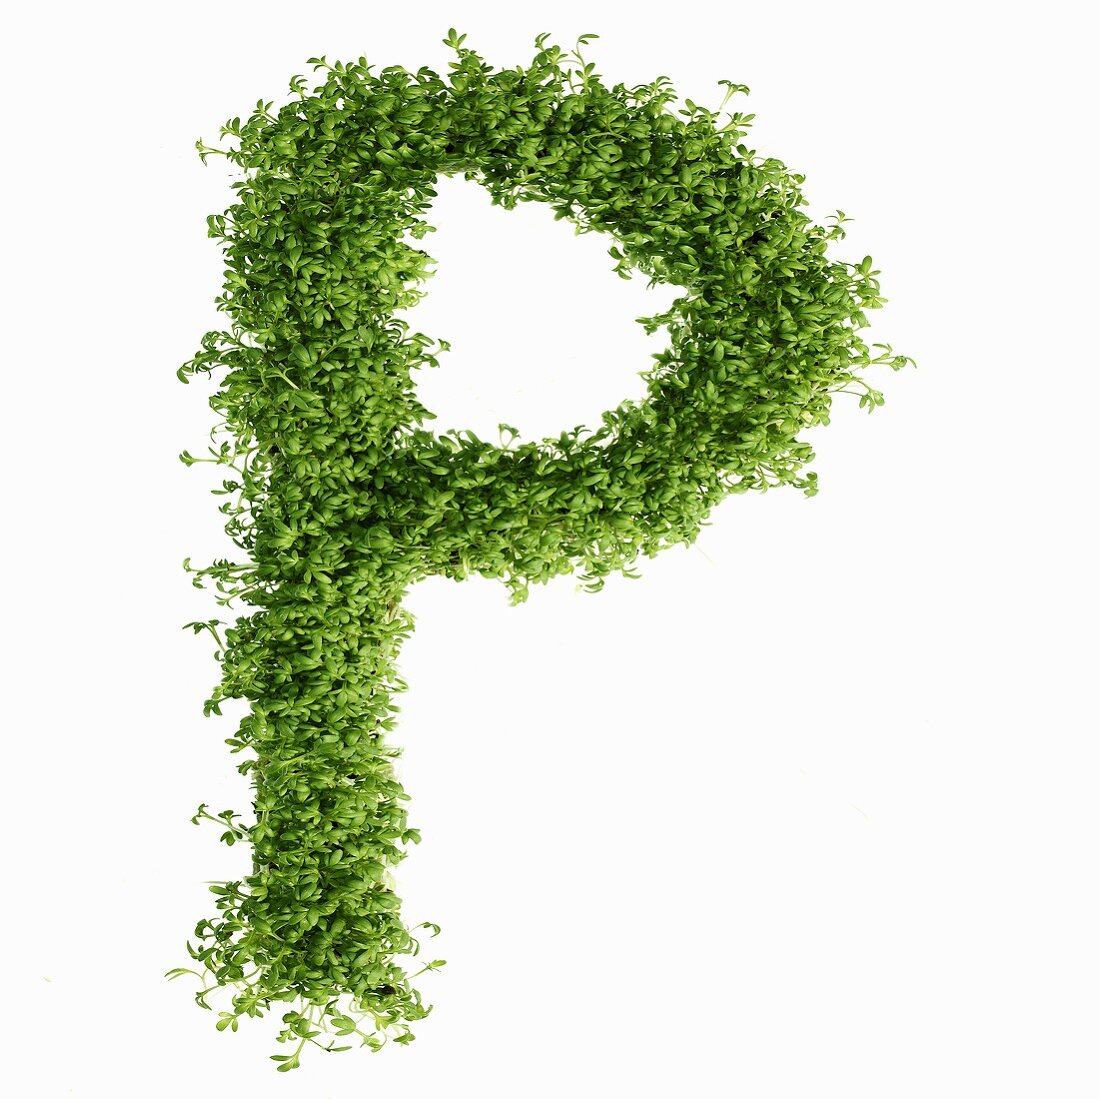 The letter P in cress